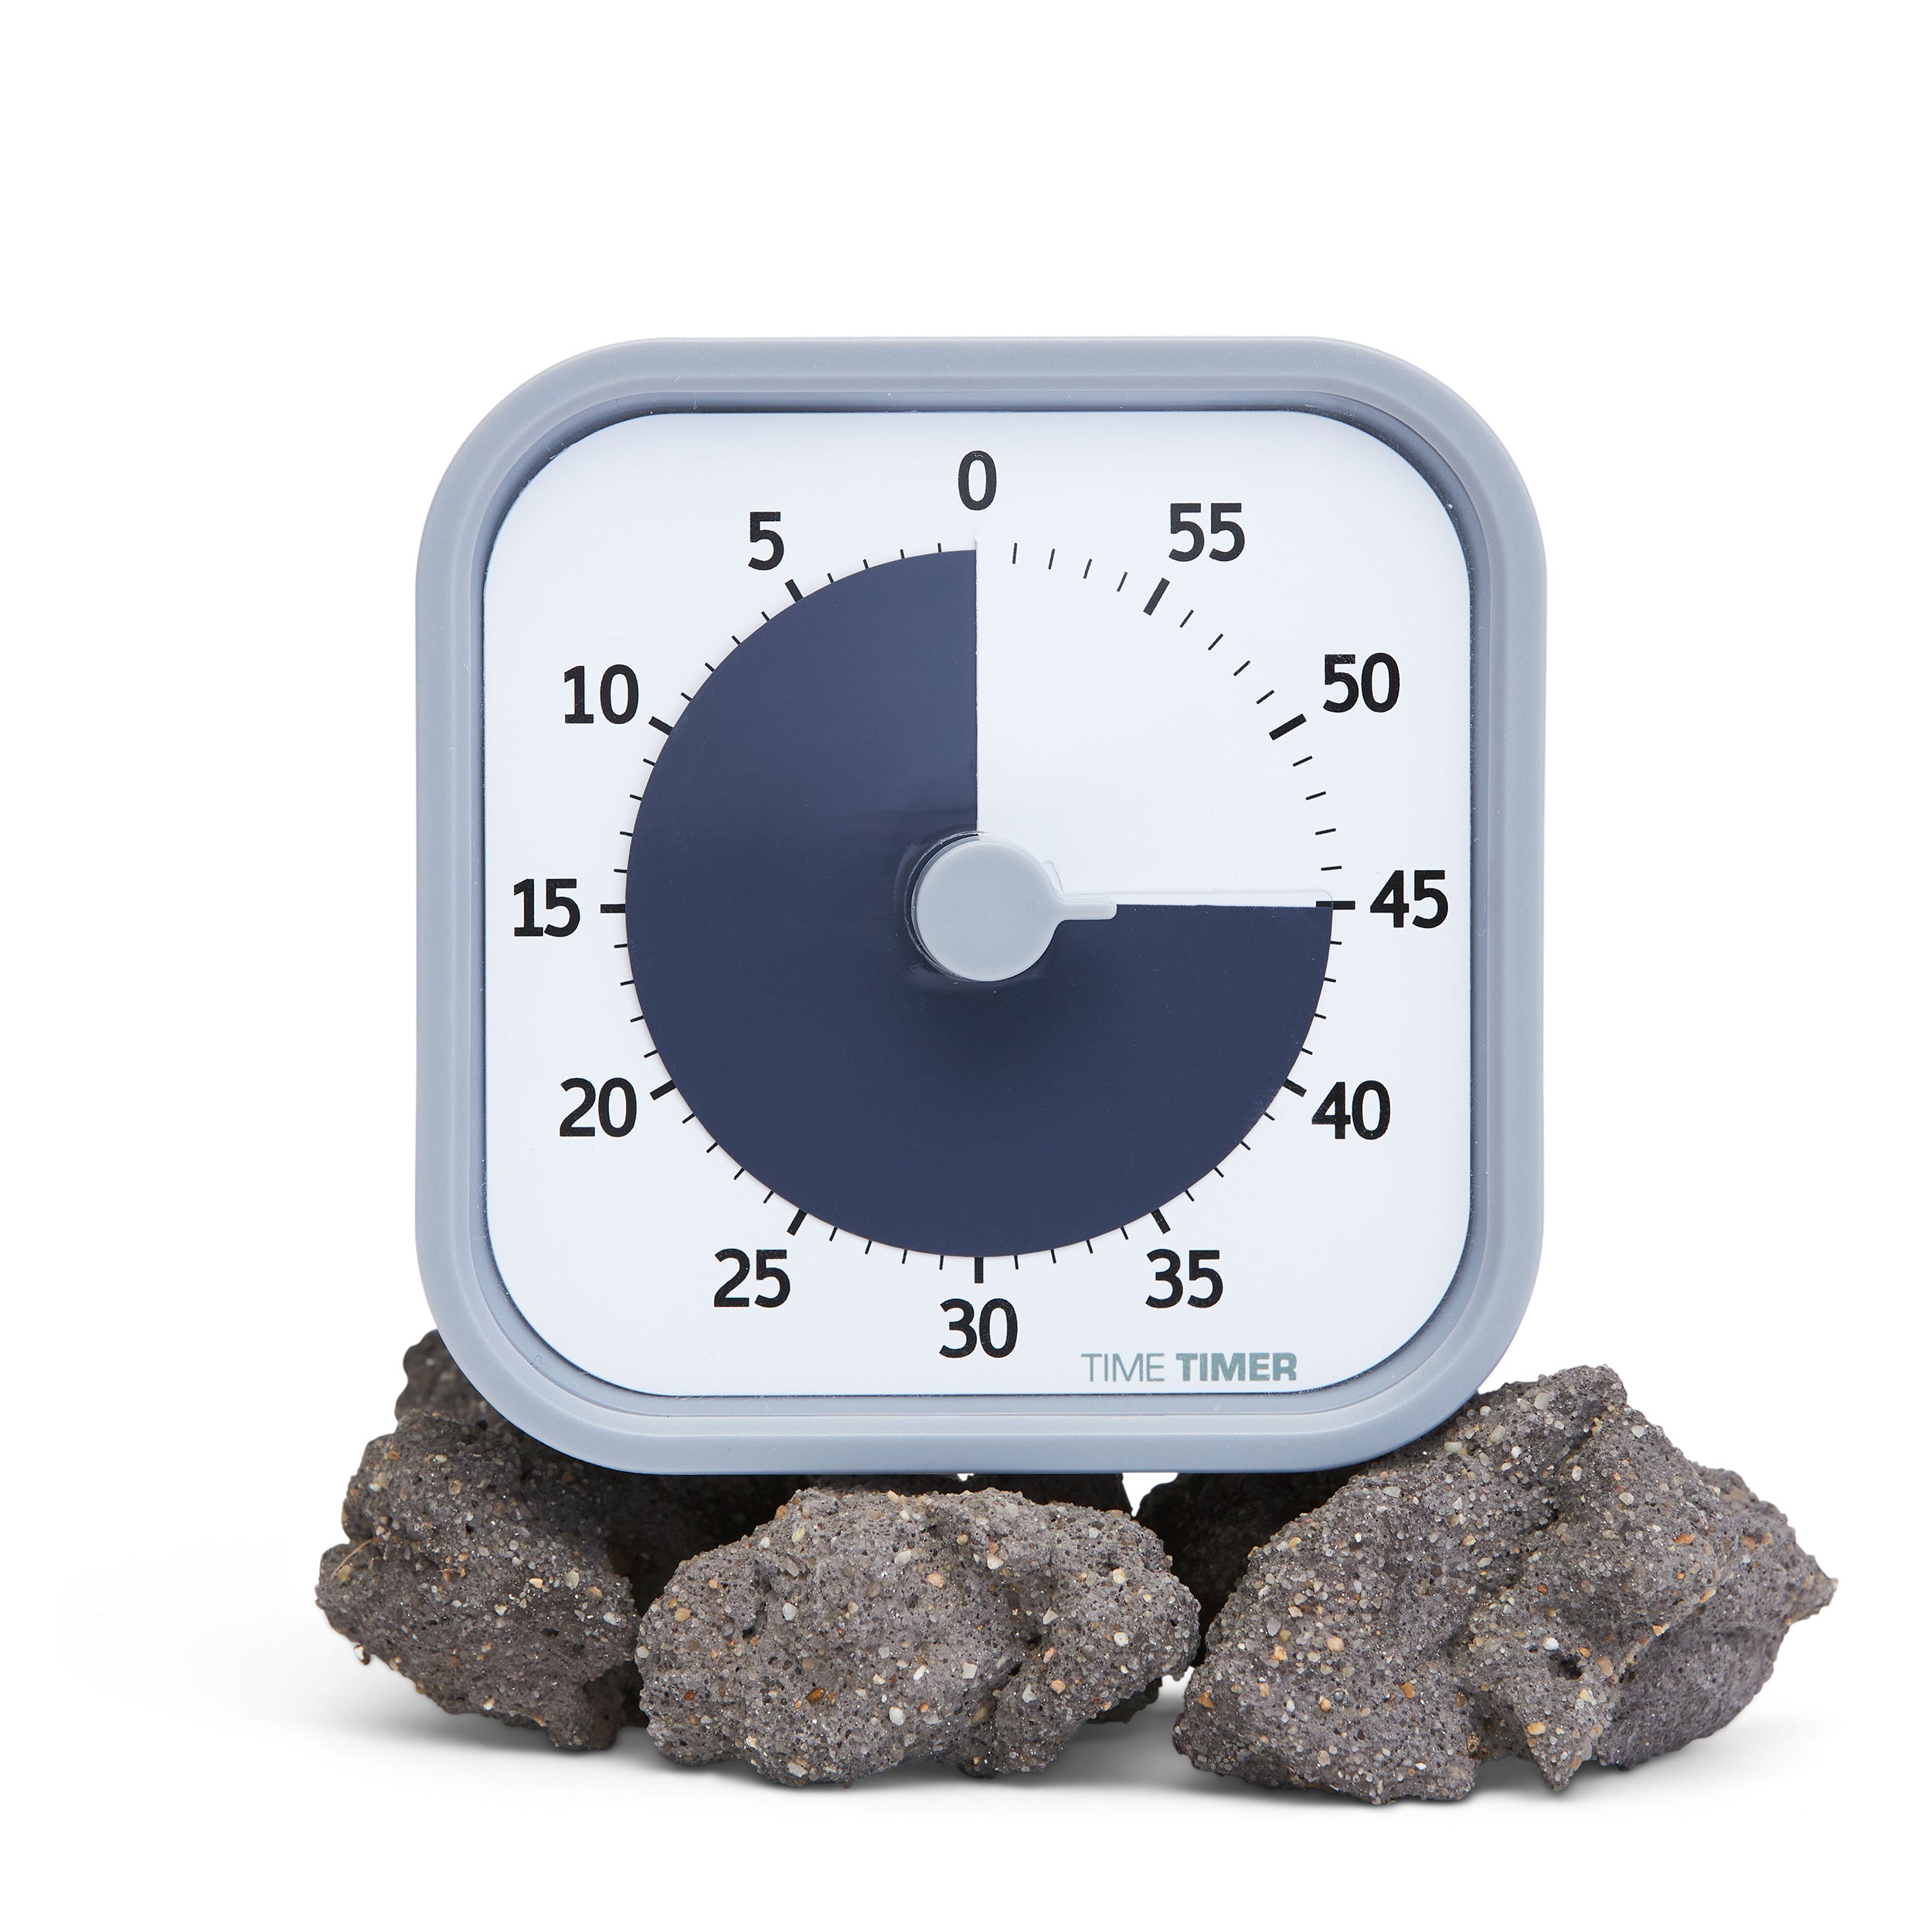 Time Timer MOD - Home Edition visual timer. This visual timer is part of a collection on trendy new colors. The timer shows a colored disk that disappears as time elapses. Pictured is the Pale Shale color, with a light grey-purple on the exterior of the timer and a dark grey-purple for the disk. Pictured with some natural rocks to show the calming nature of the timer. 